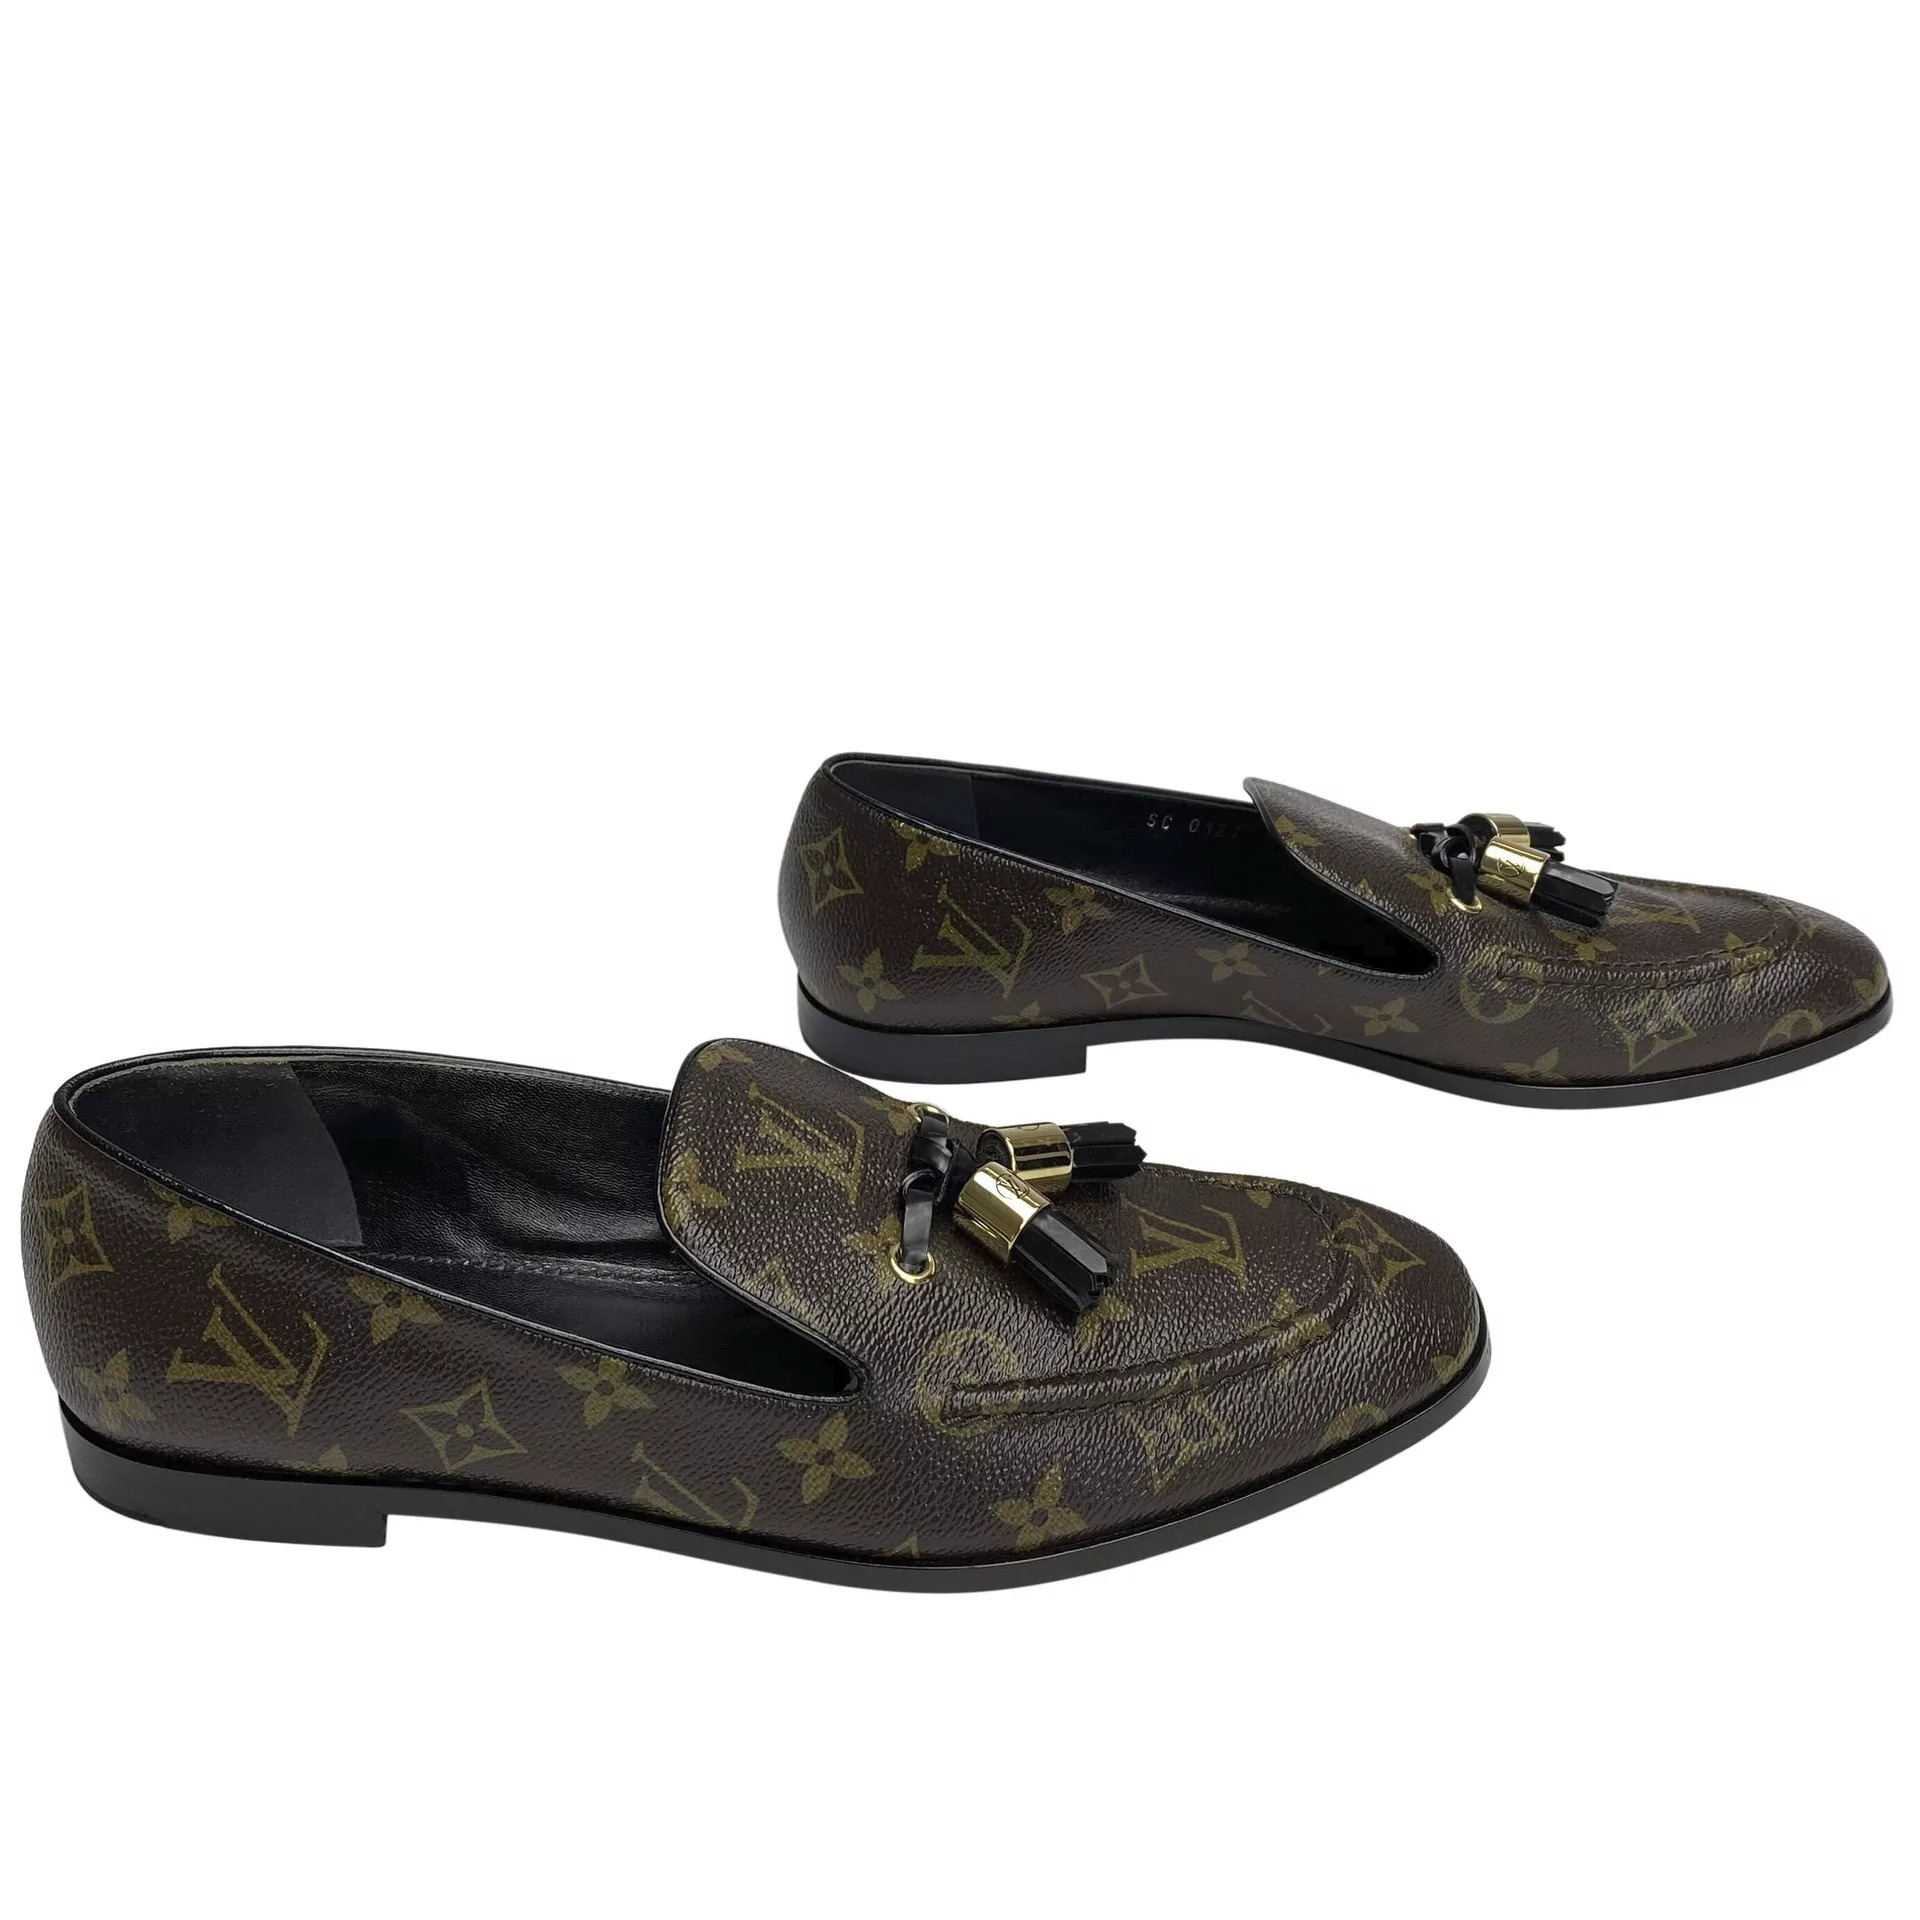 Mocassim Louis Vuitton Loafer Society